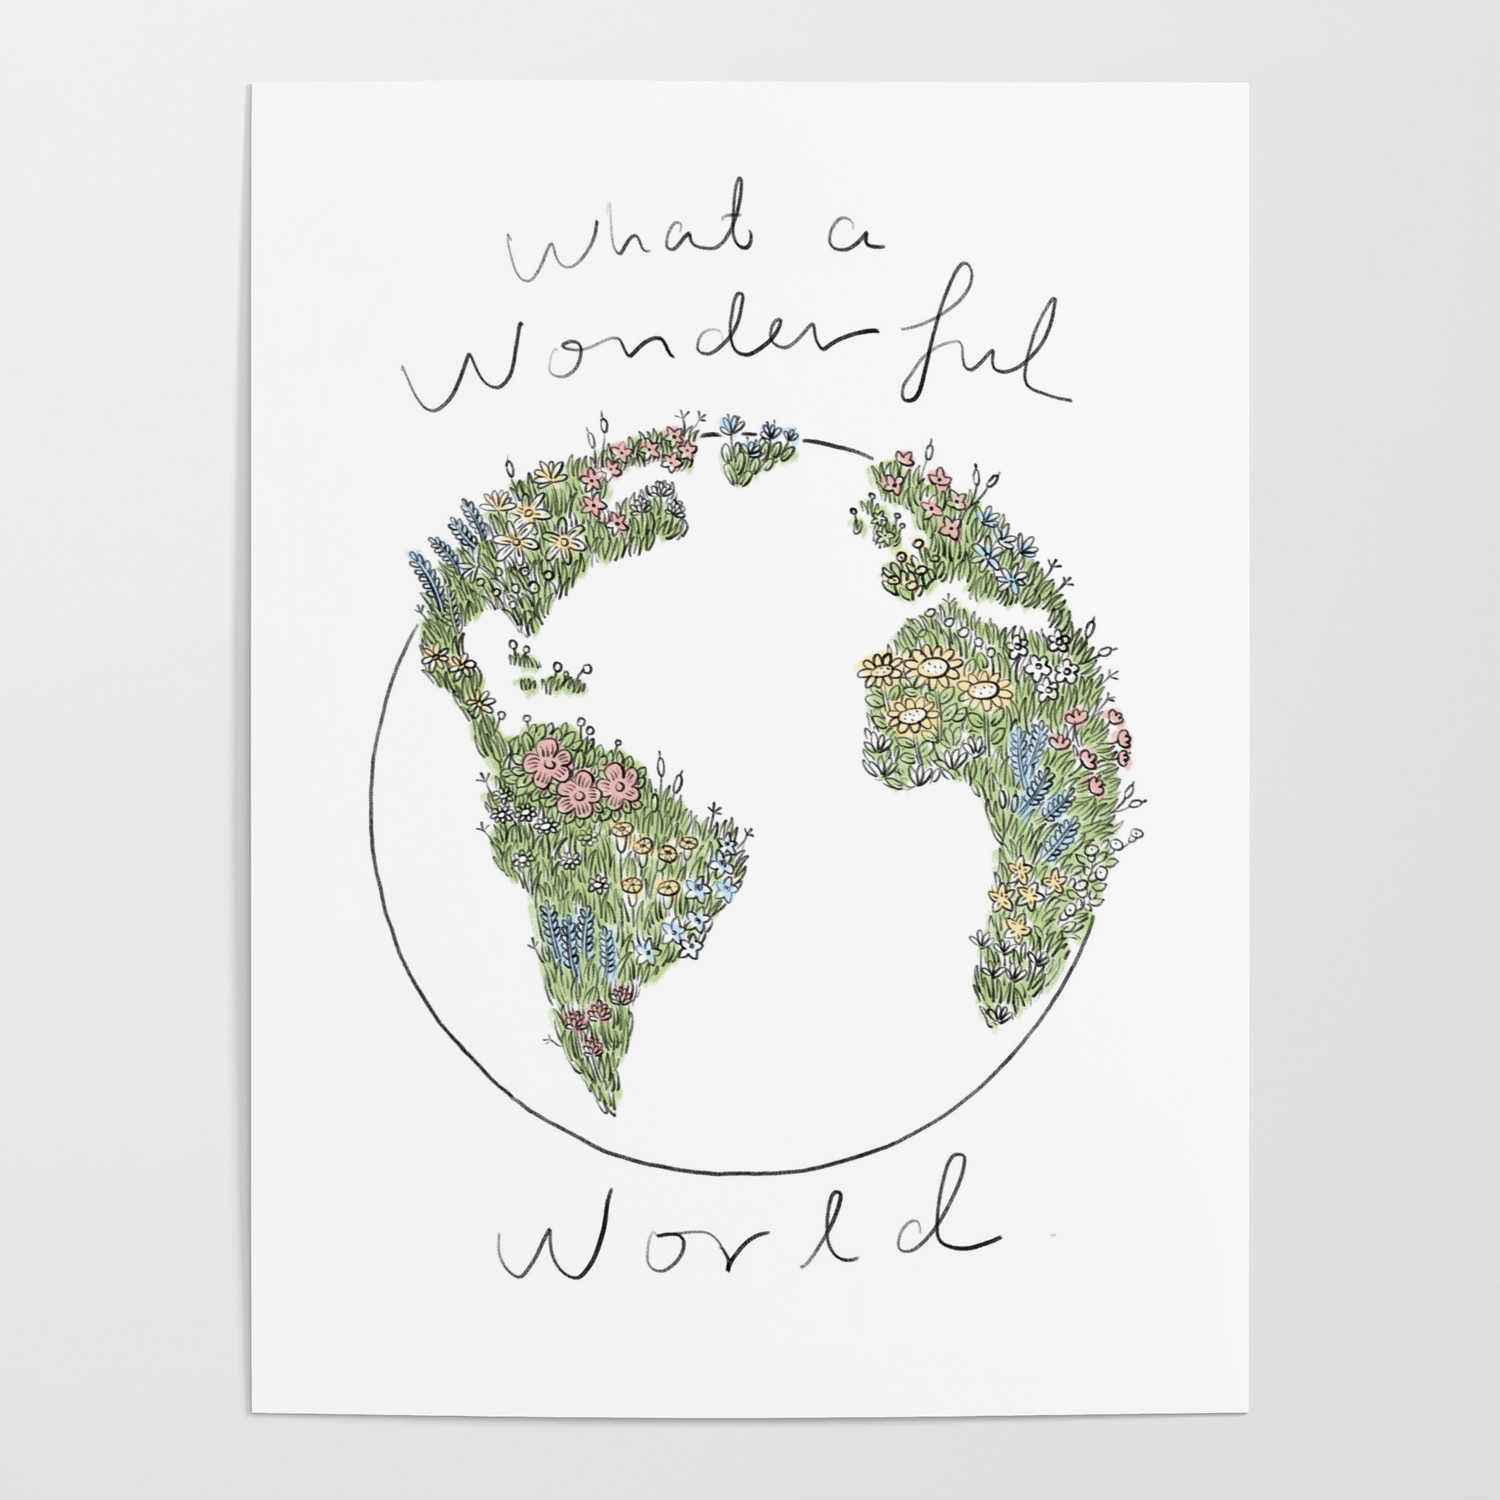 Wine From Around the World Poster Print 24x36 PS9565 